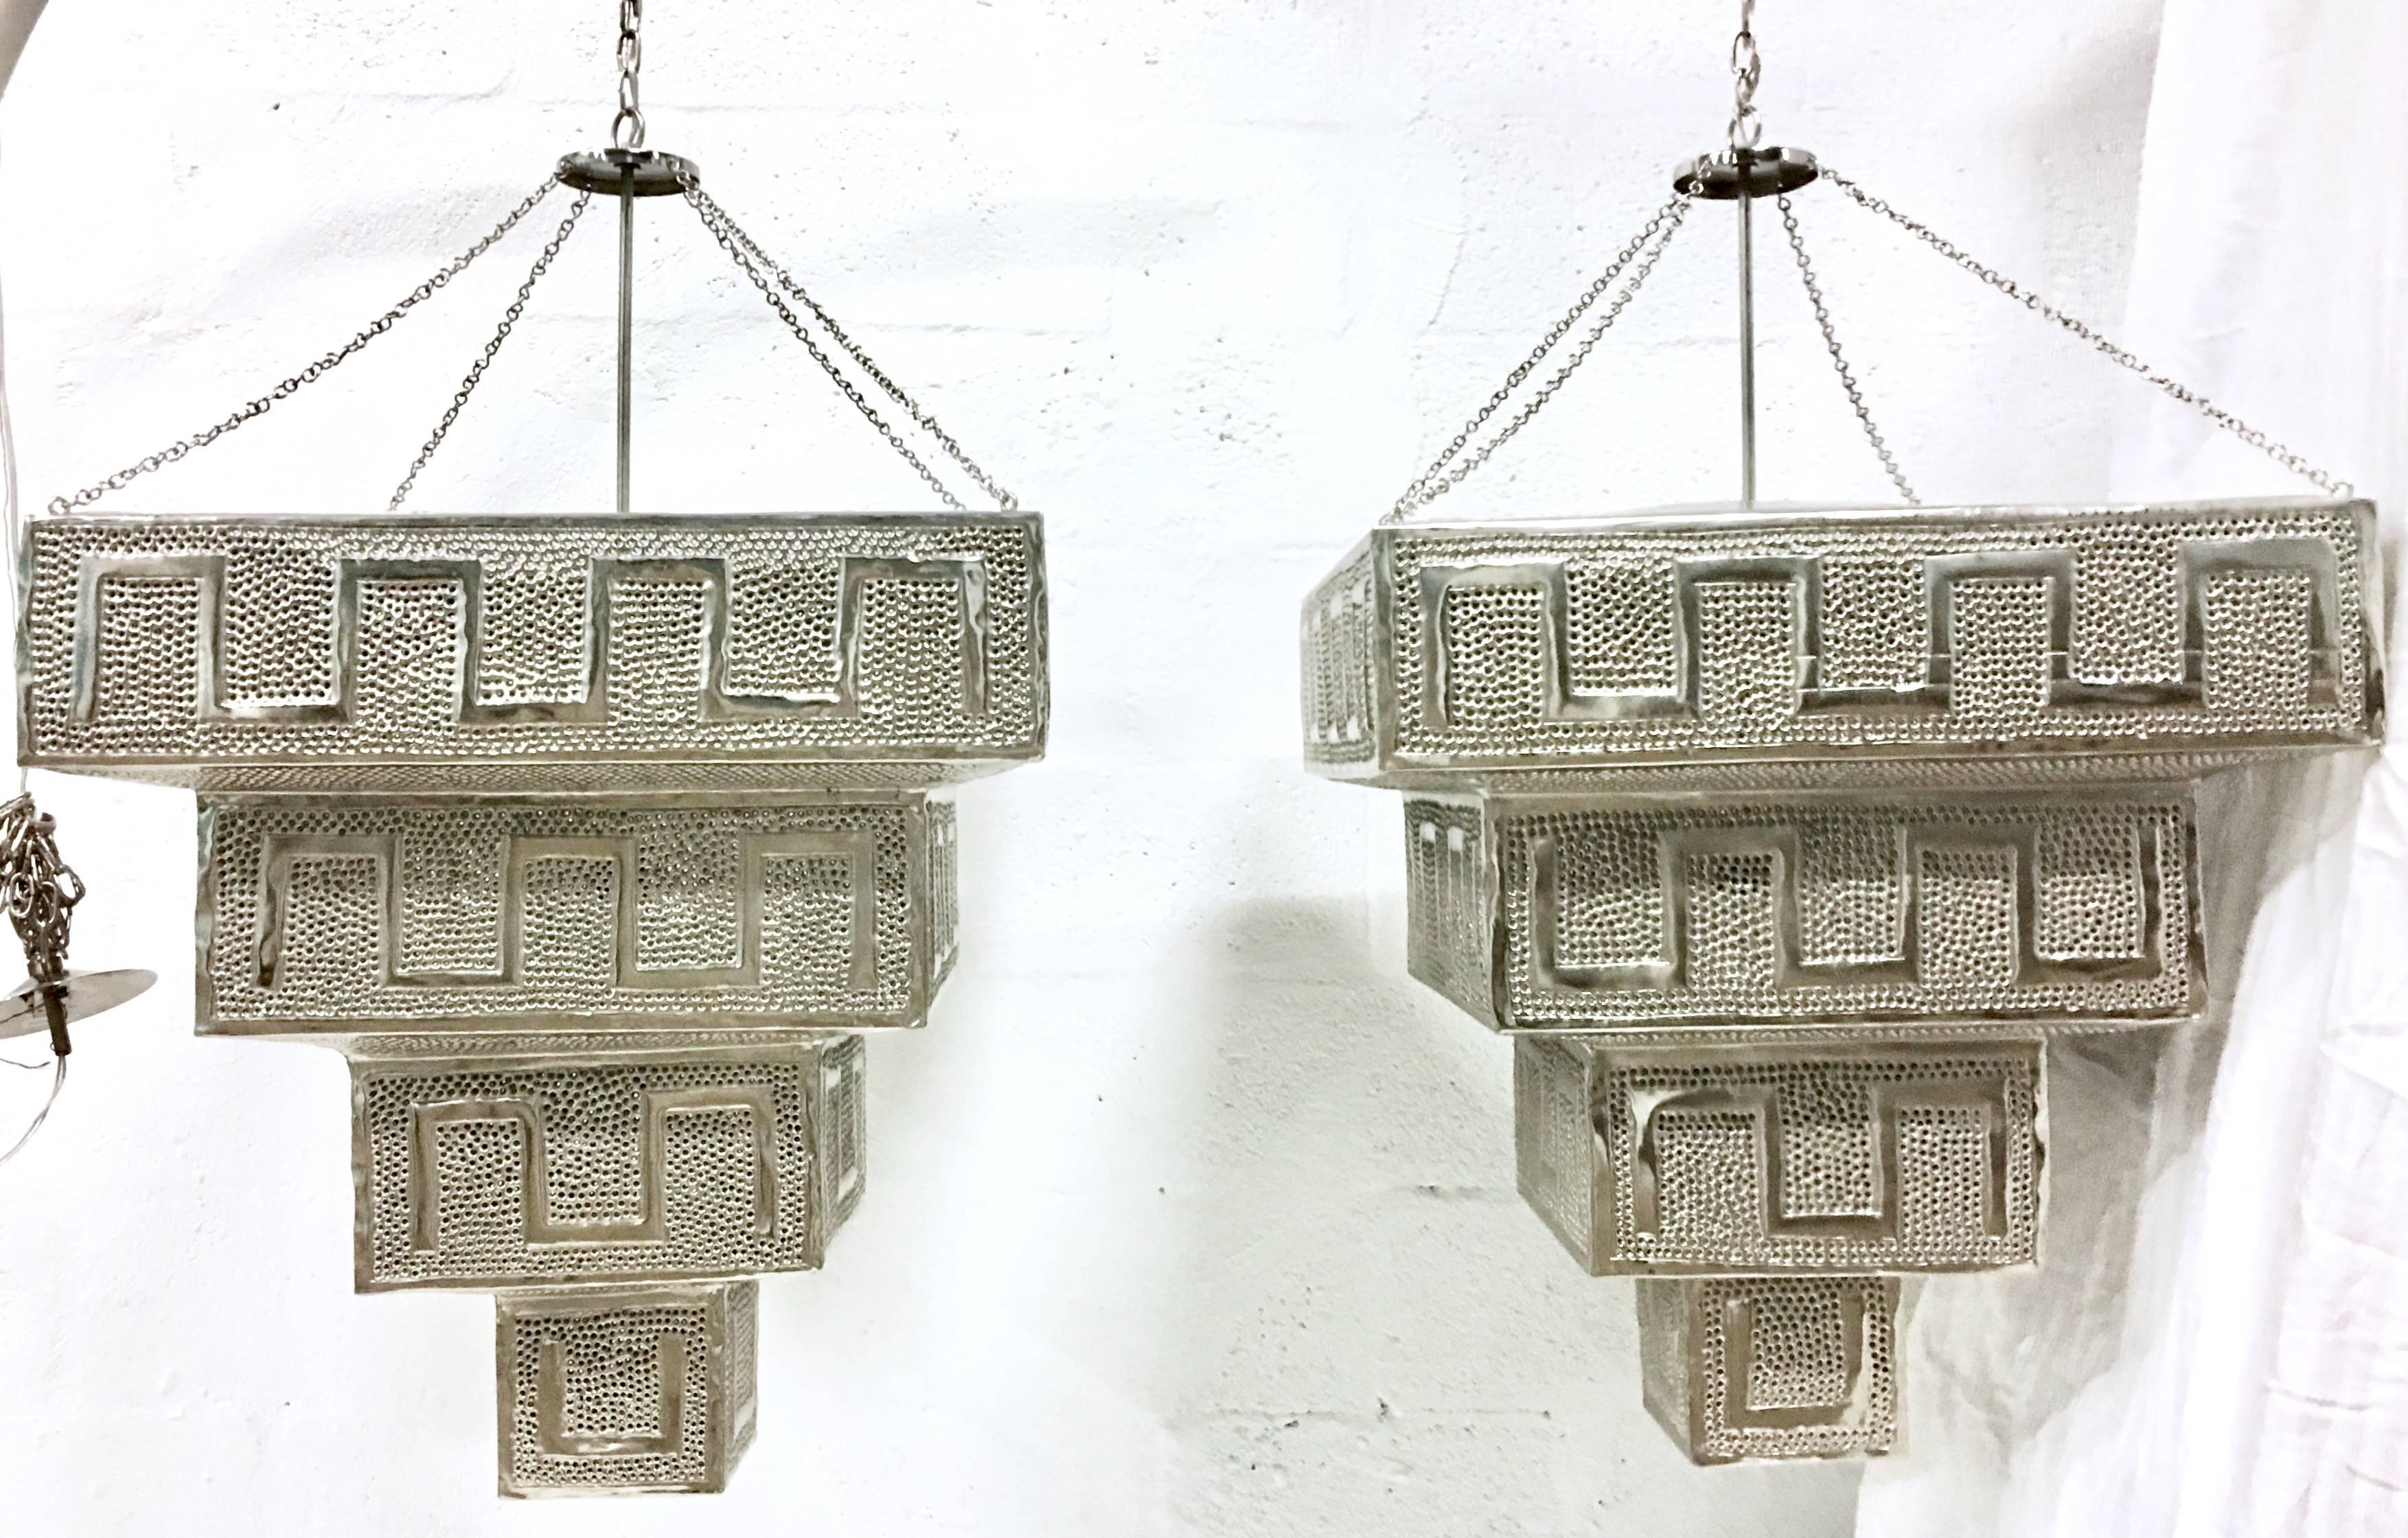 Contemporary pair of monumental silver steel and chrome pierced triple layer Moroccan style chandeliers. These Arabesque inspired works of art have a geometric raised Greek key pattern with perforated detail which allows the light to play of the